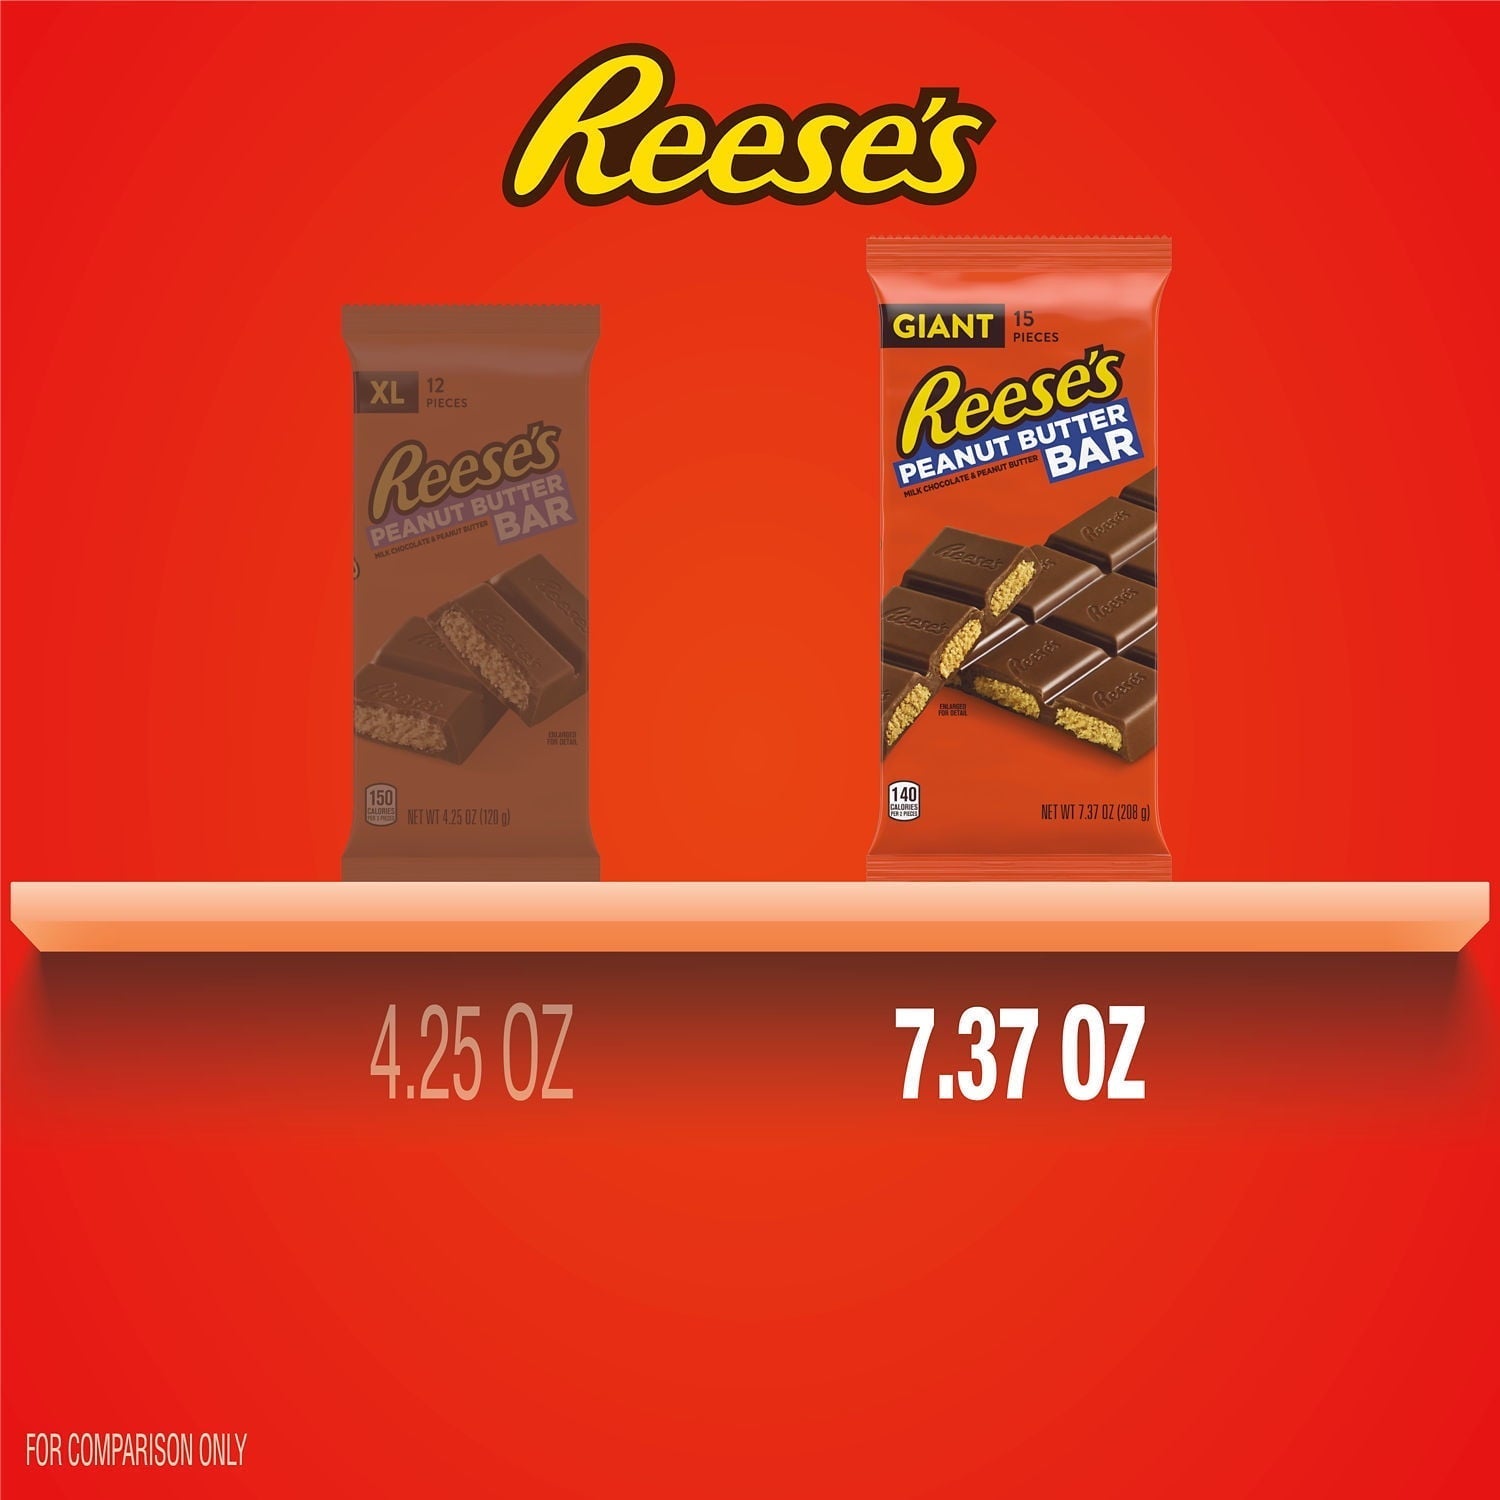 Wholesale prices with free shipping all over United States Reese's Milk Chocolate Peanut Butter Giant Candy, Bar 7.37 oz, 15 Pieces - Steven Deals